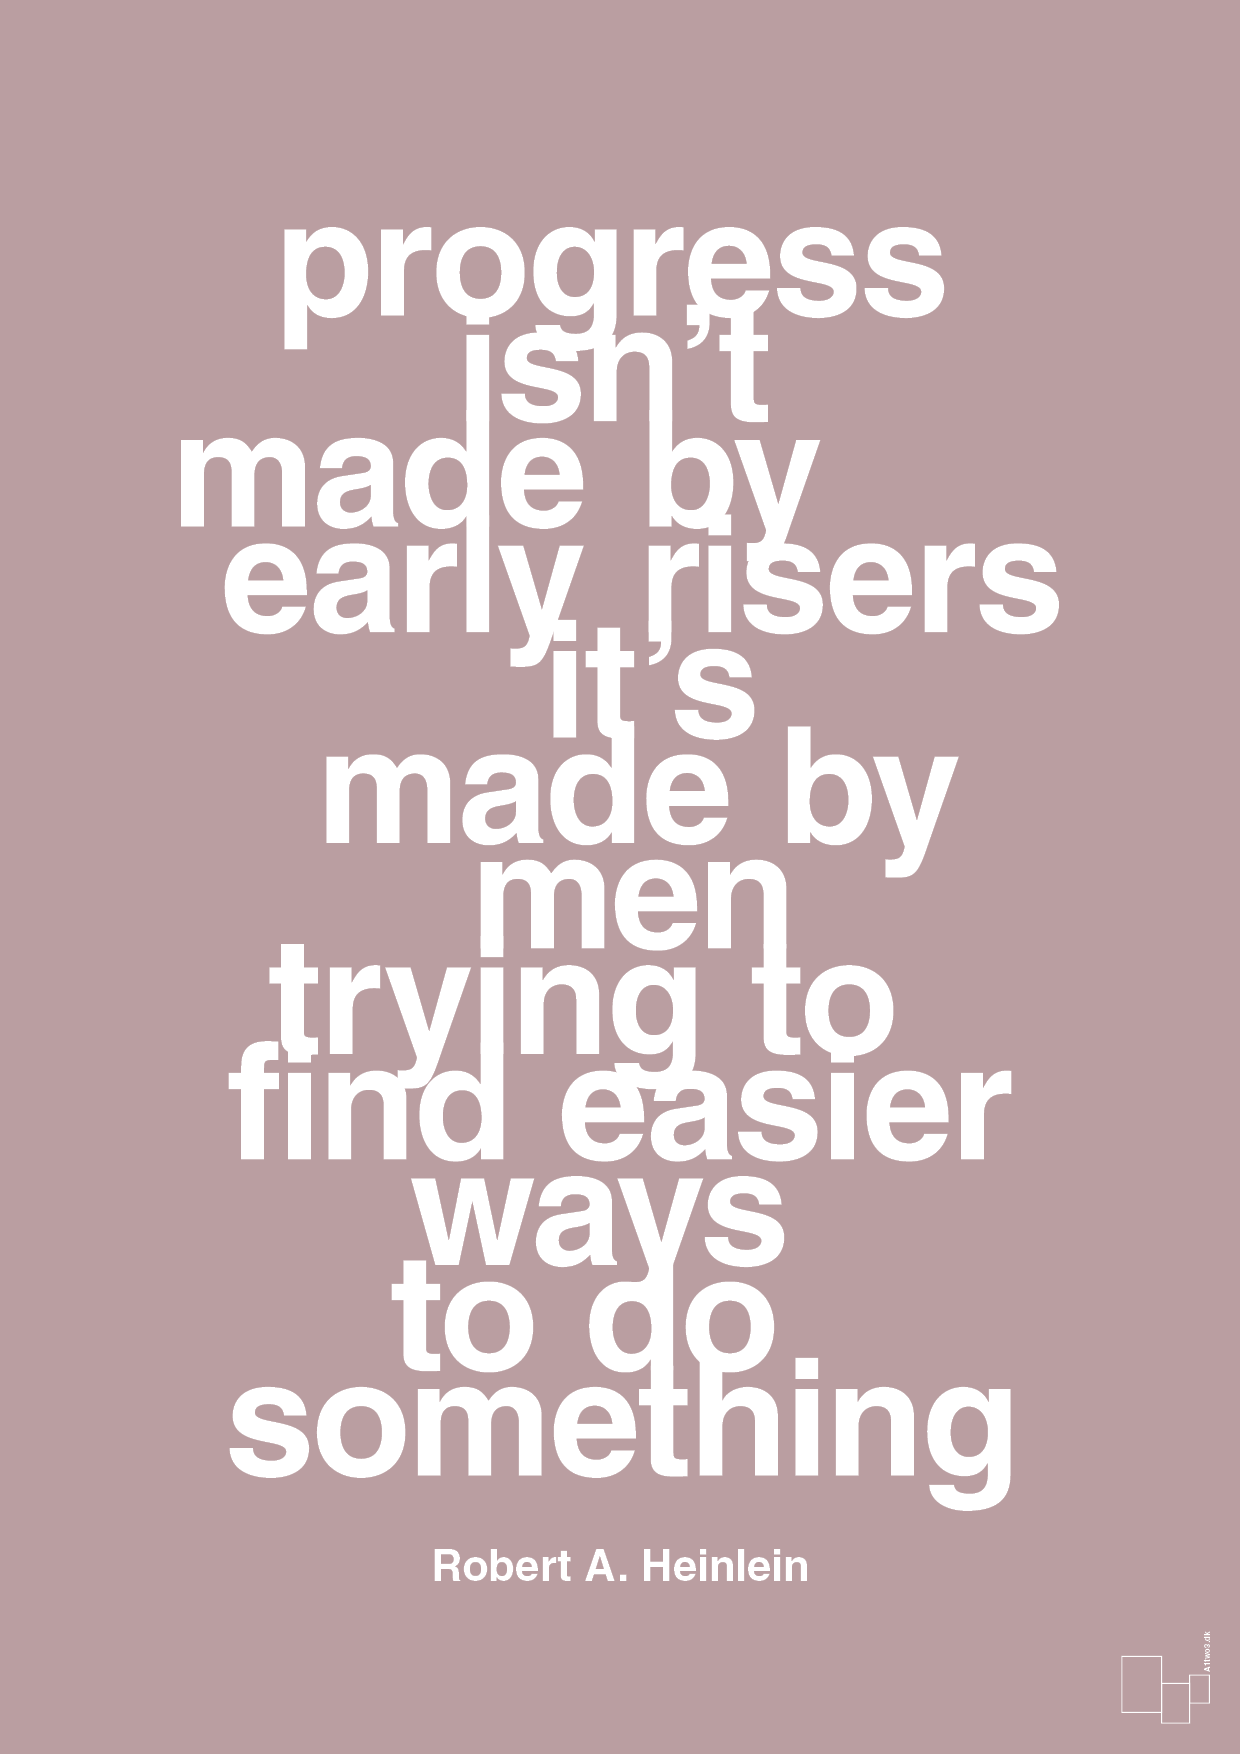 progress isnt made by early risers - Plakat med Citater i Light Rose